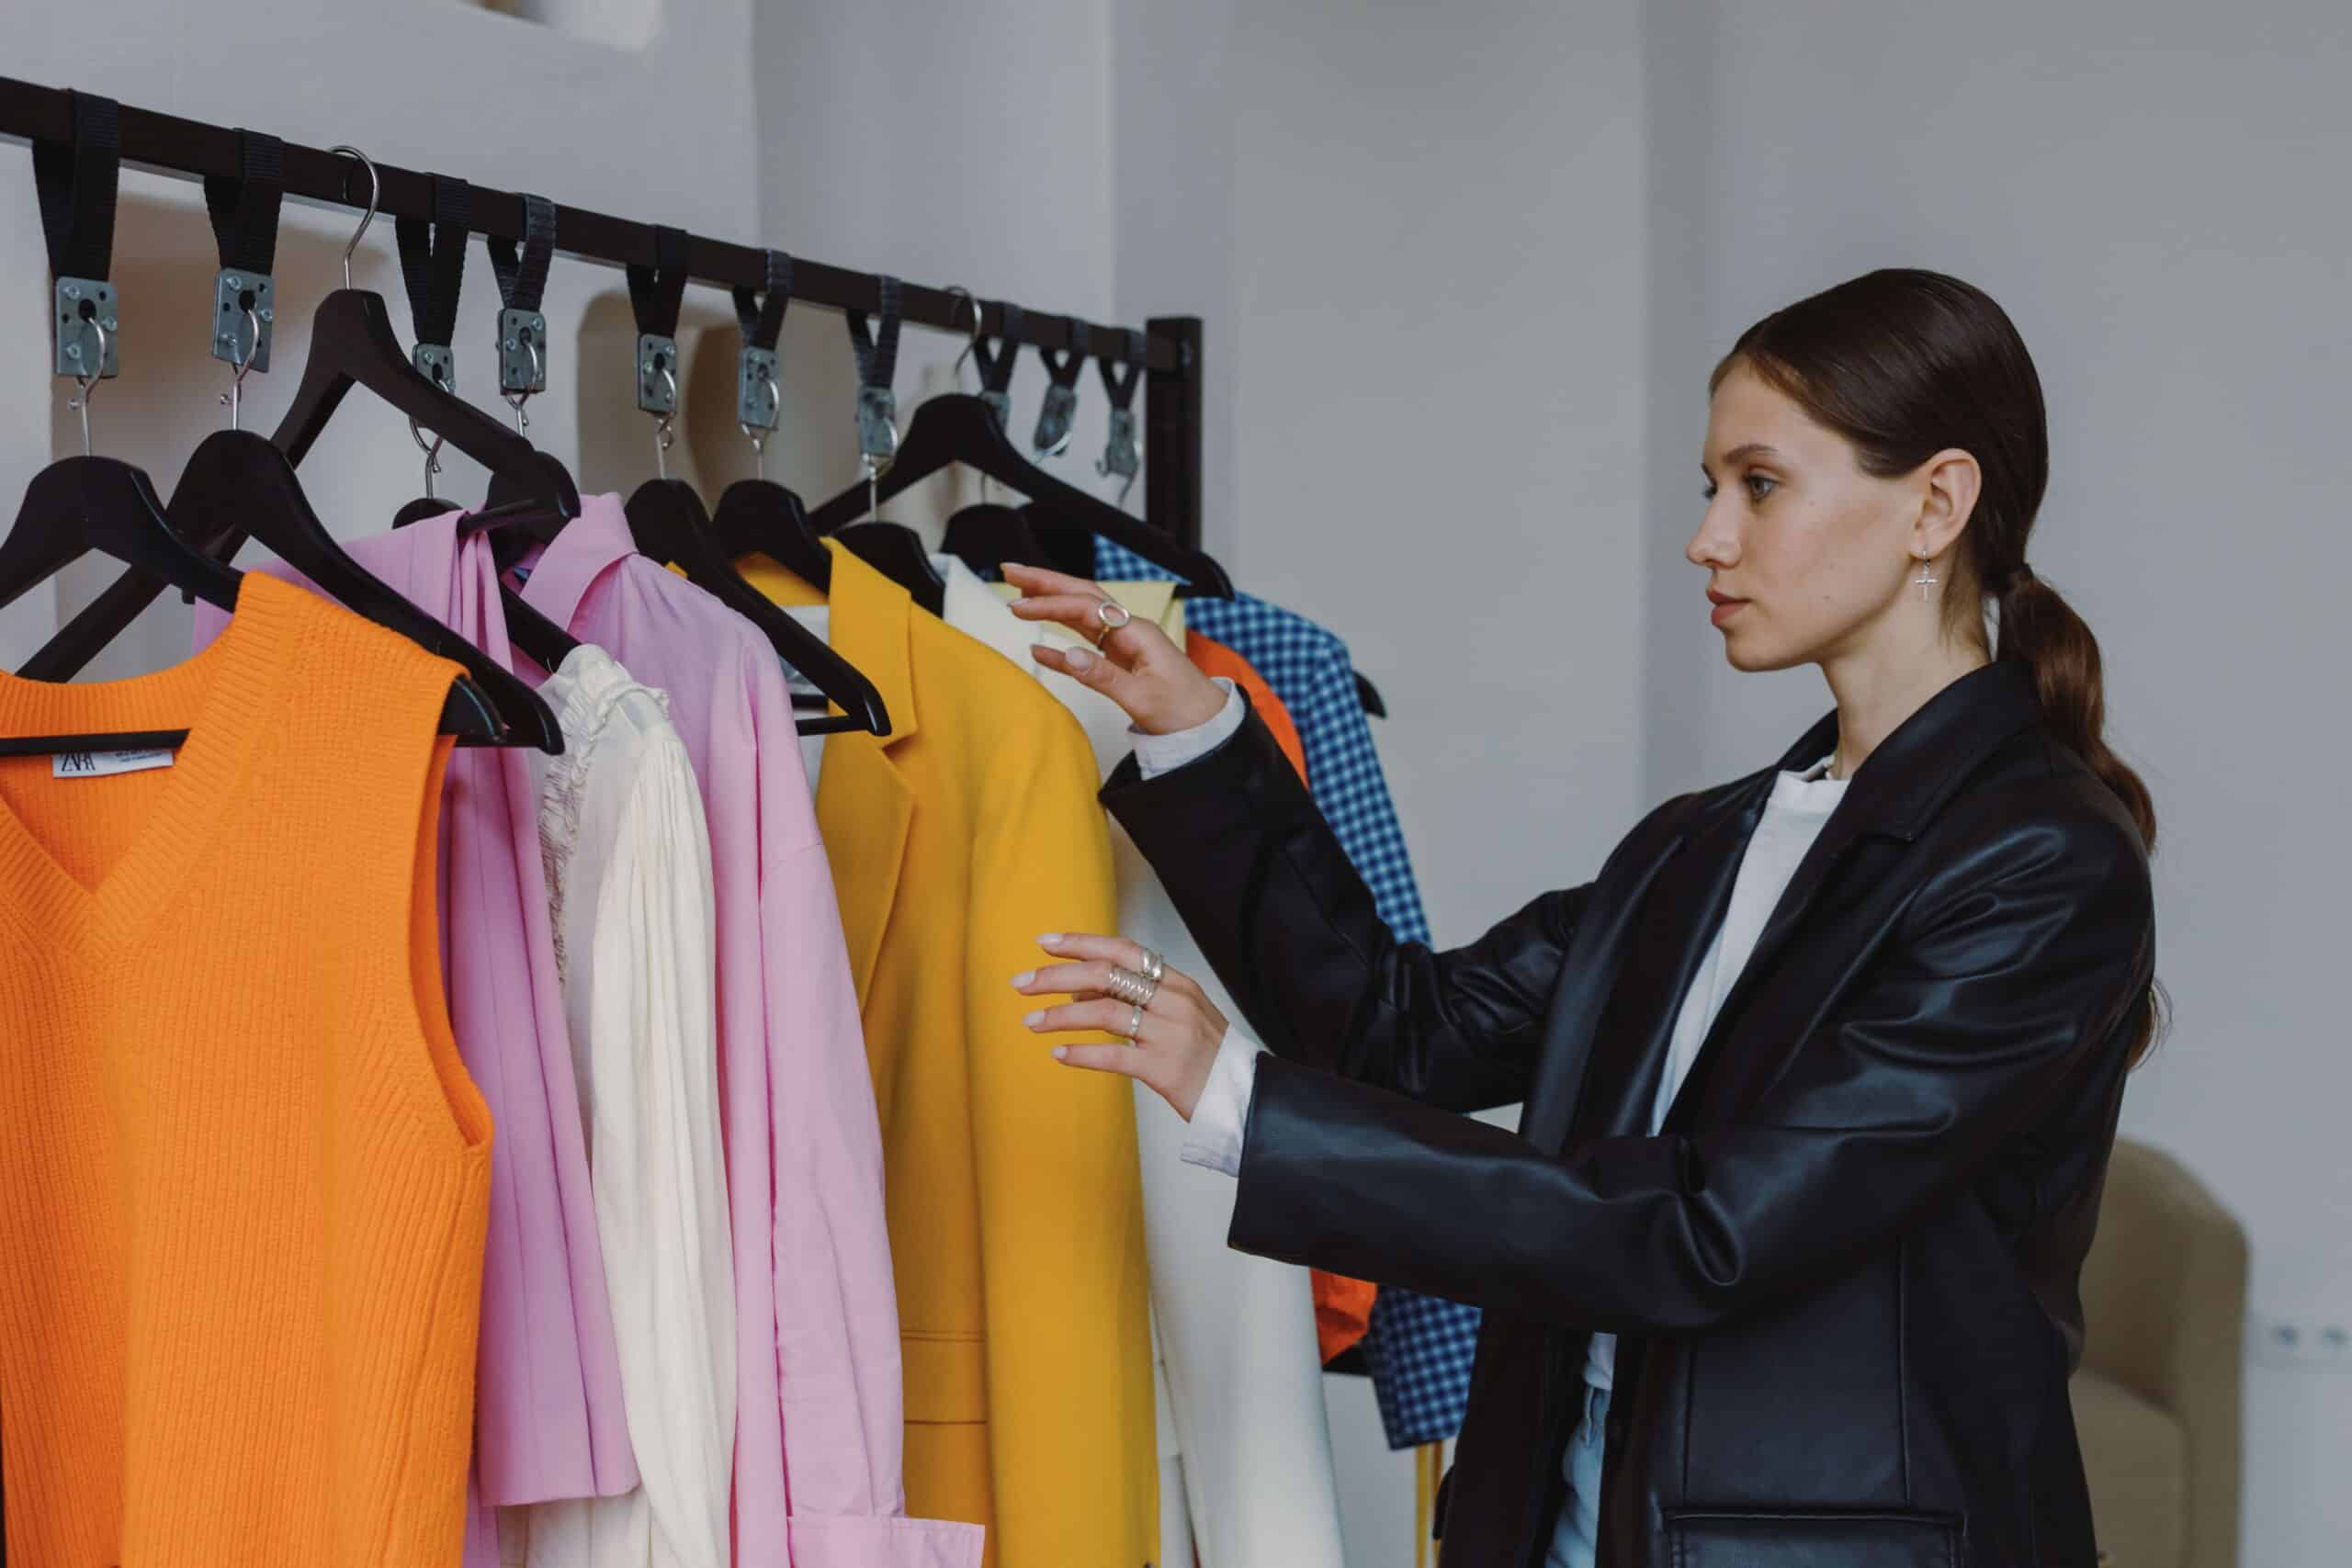 woman looking at clothing rack with various business attire items